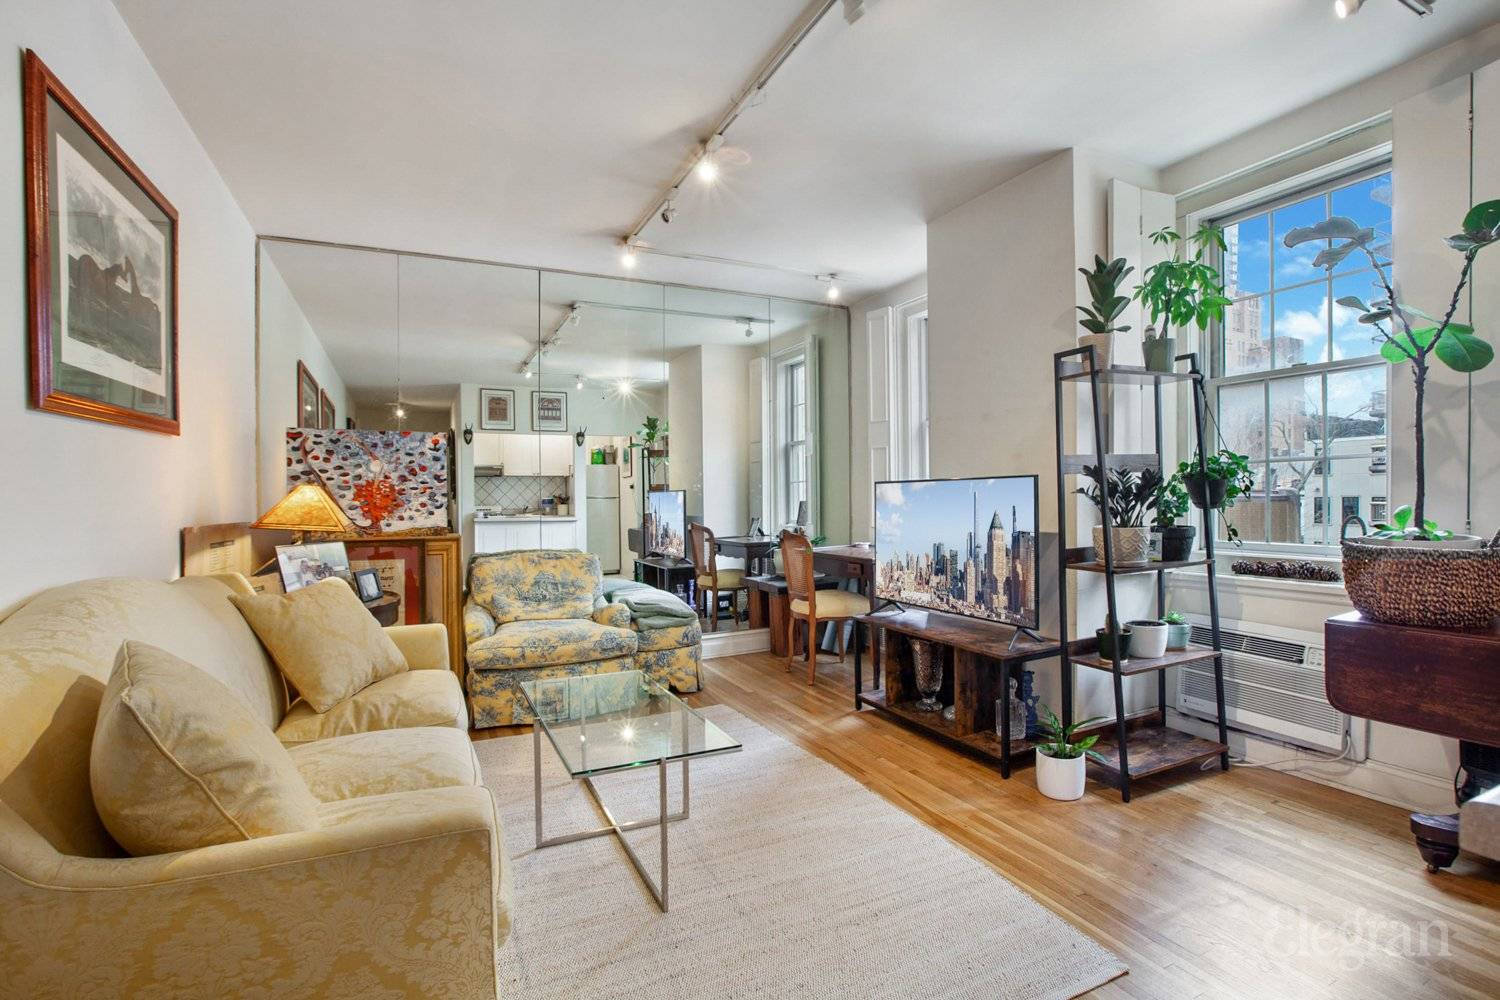 Large Charming 1 Bedroom in an Upper East Side townhouse on a lovely tree lined block LIVING ROOM 2 oversized shuttered windows for great natural light Accommodates living room furniture ...